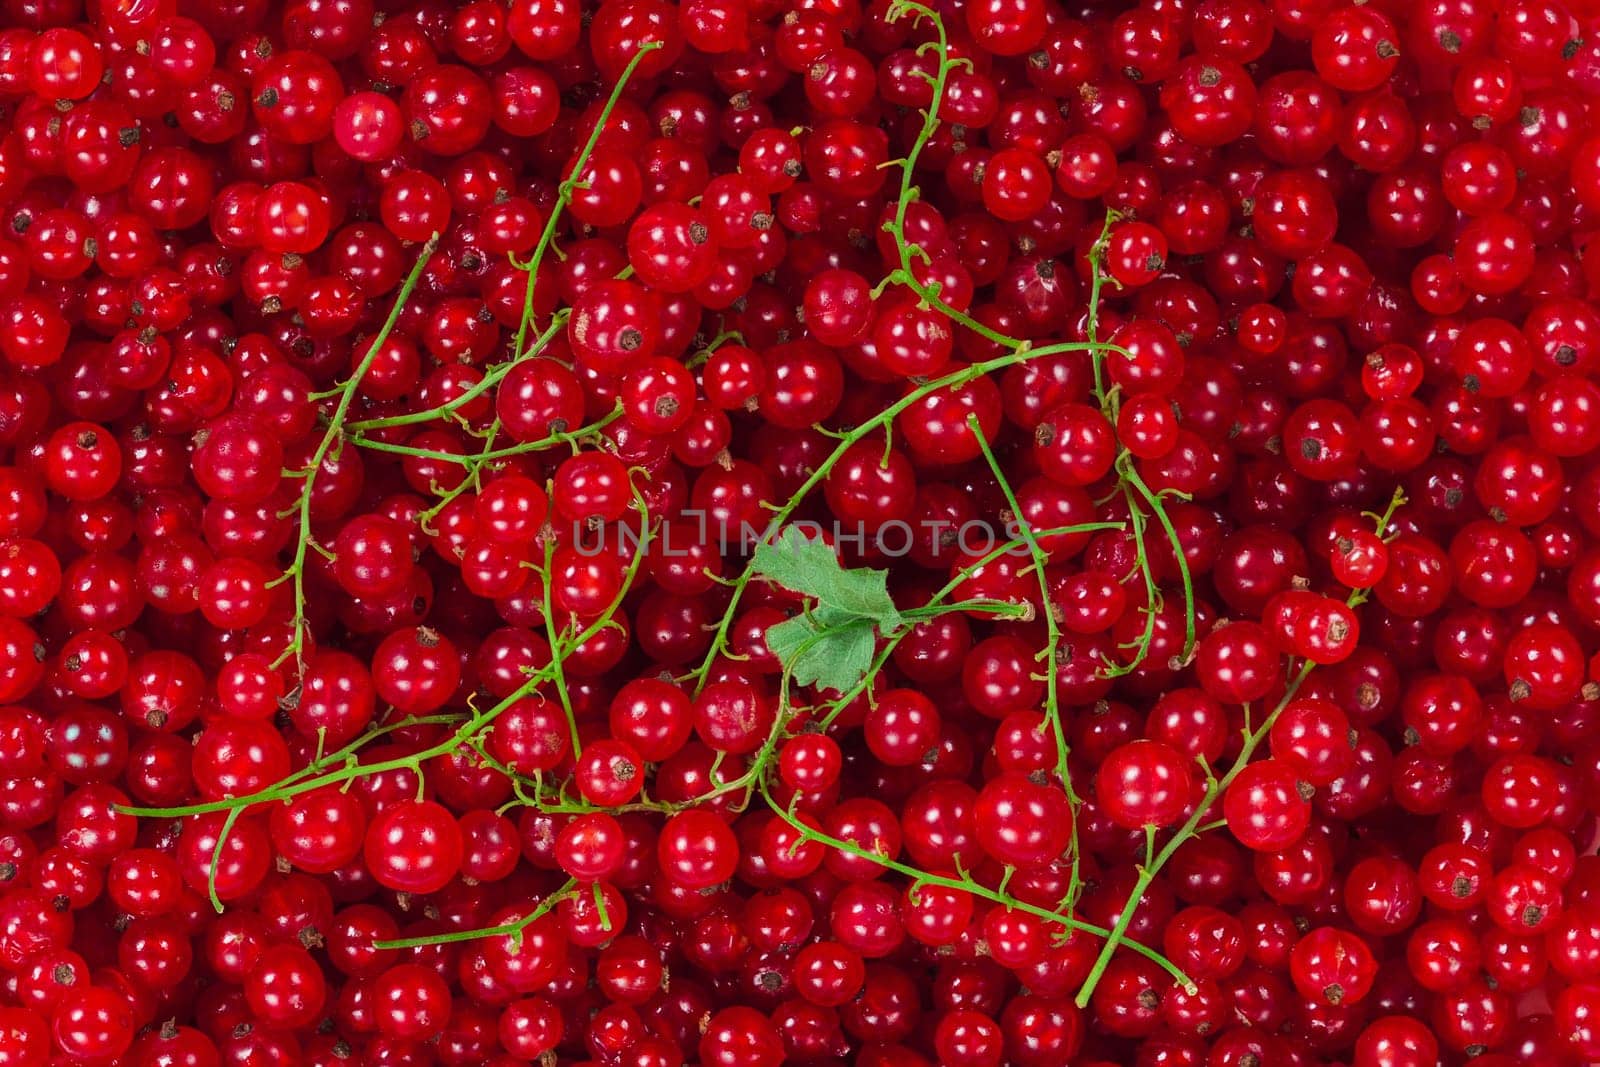 Ripe red currant berries with green twigs for the whole frame by ElenaNEL